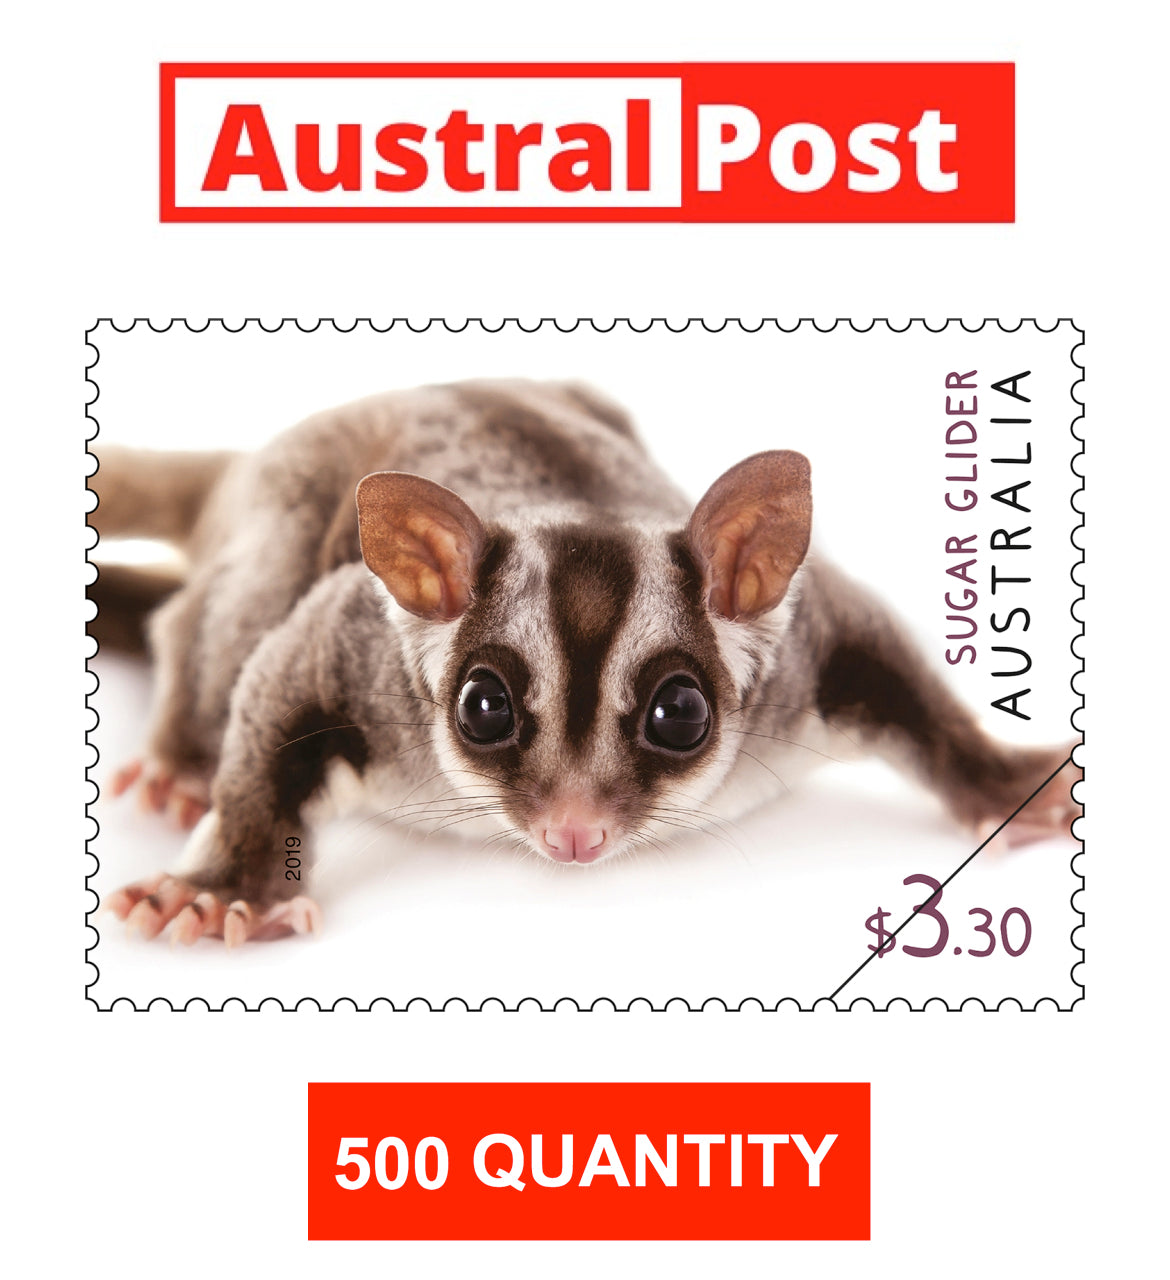 Australia Post MNH Postage Stamps - Self Adhesive Mint - Face Value $1650 Mix AusPost